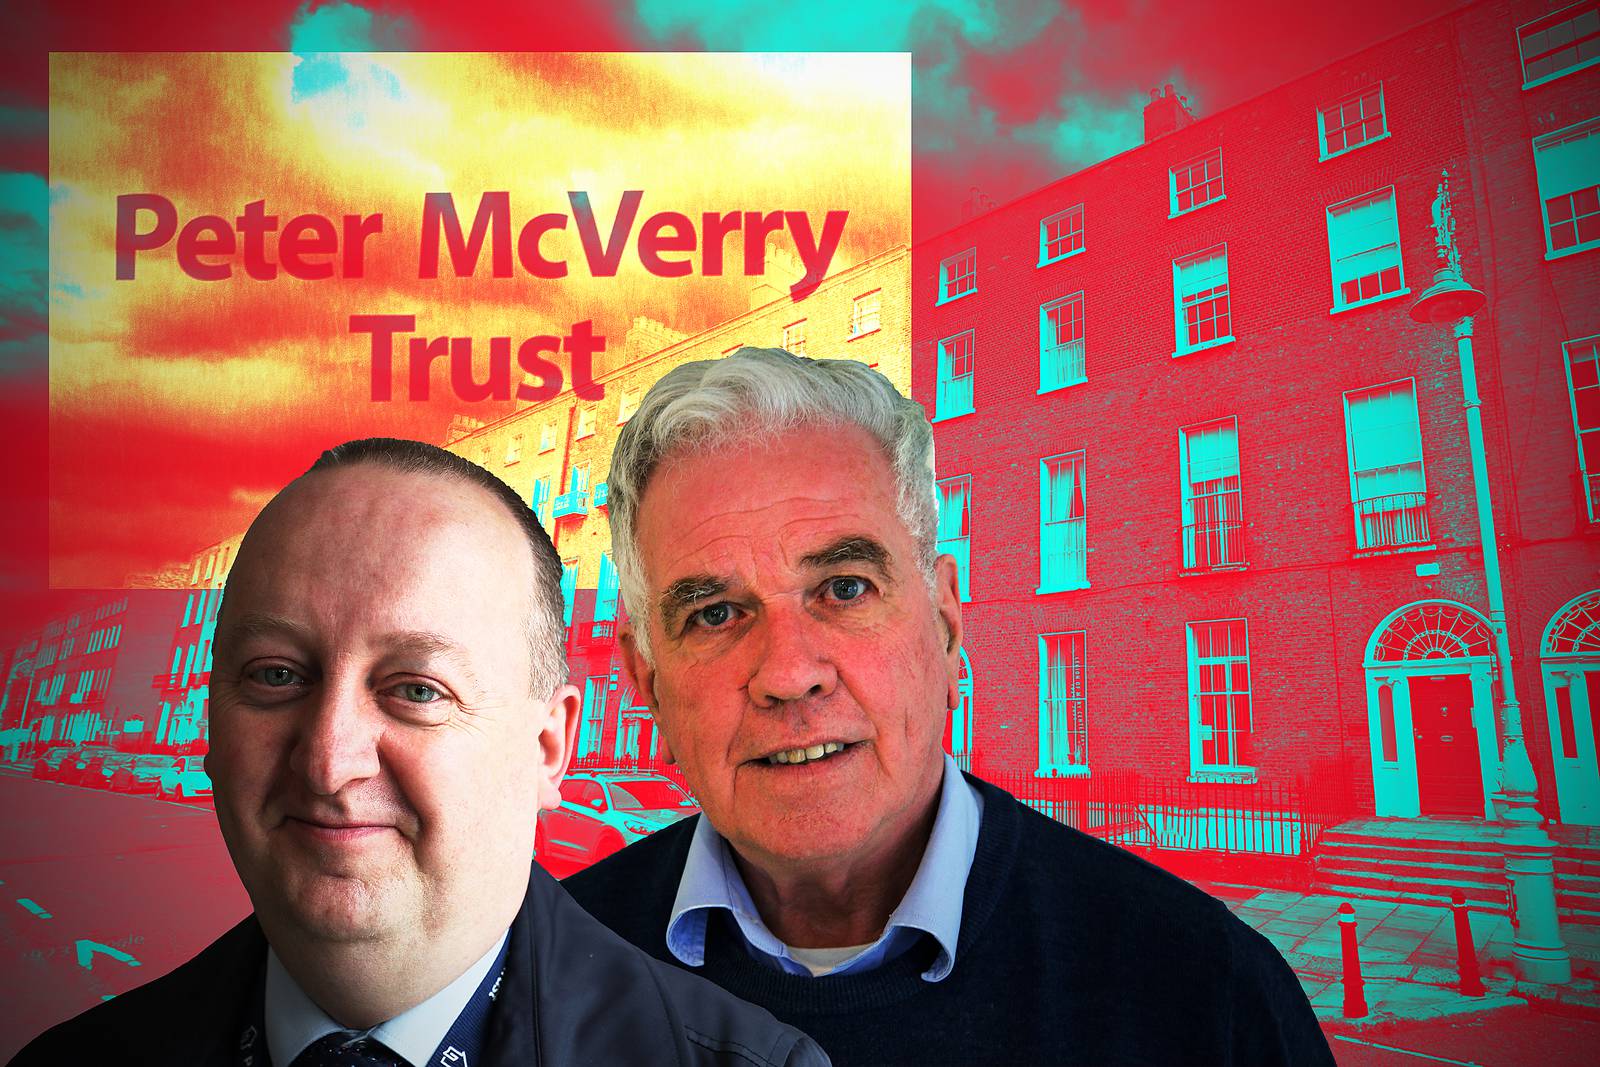 Pat Doyle (left). former chief executive of the Peter McVerry Trust, and Peter McVerry (right)